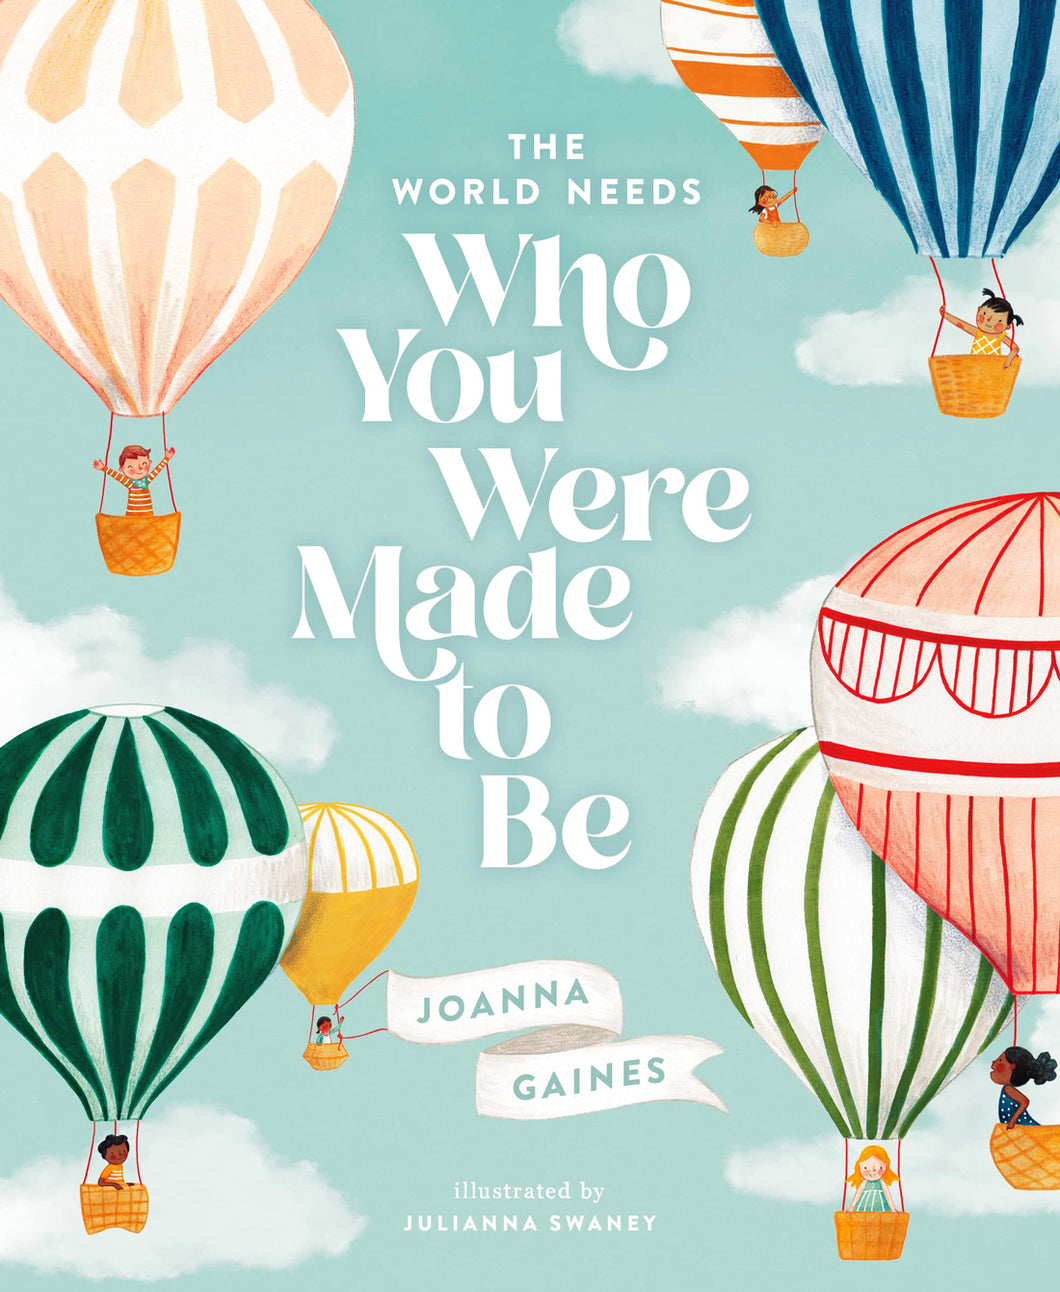 The World Needs Who You Were Made to Be by Joanna Gaines / Hardcover - NEW BOOK